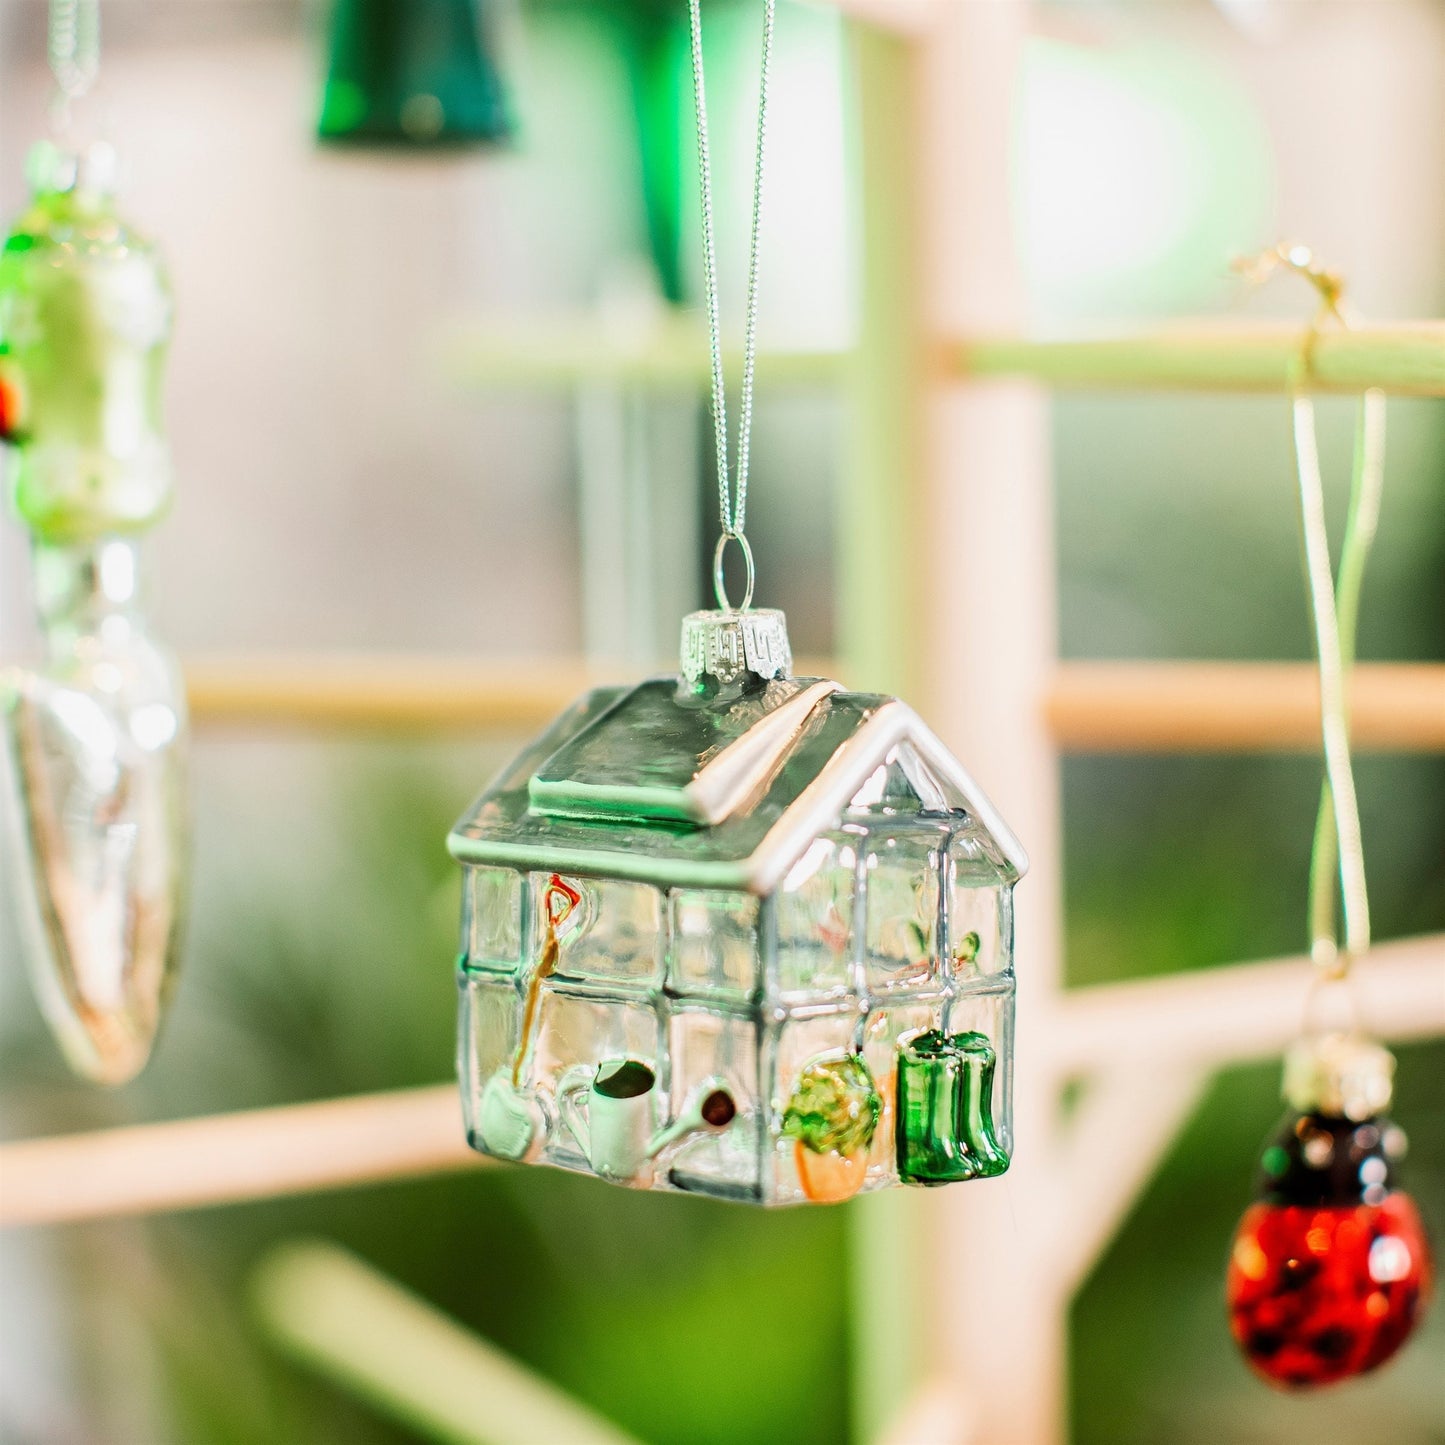 Greenhouse Shaped Bauble Christmas Tree Decoration